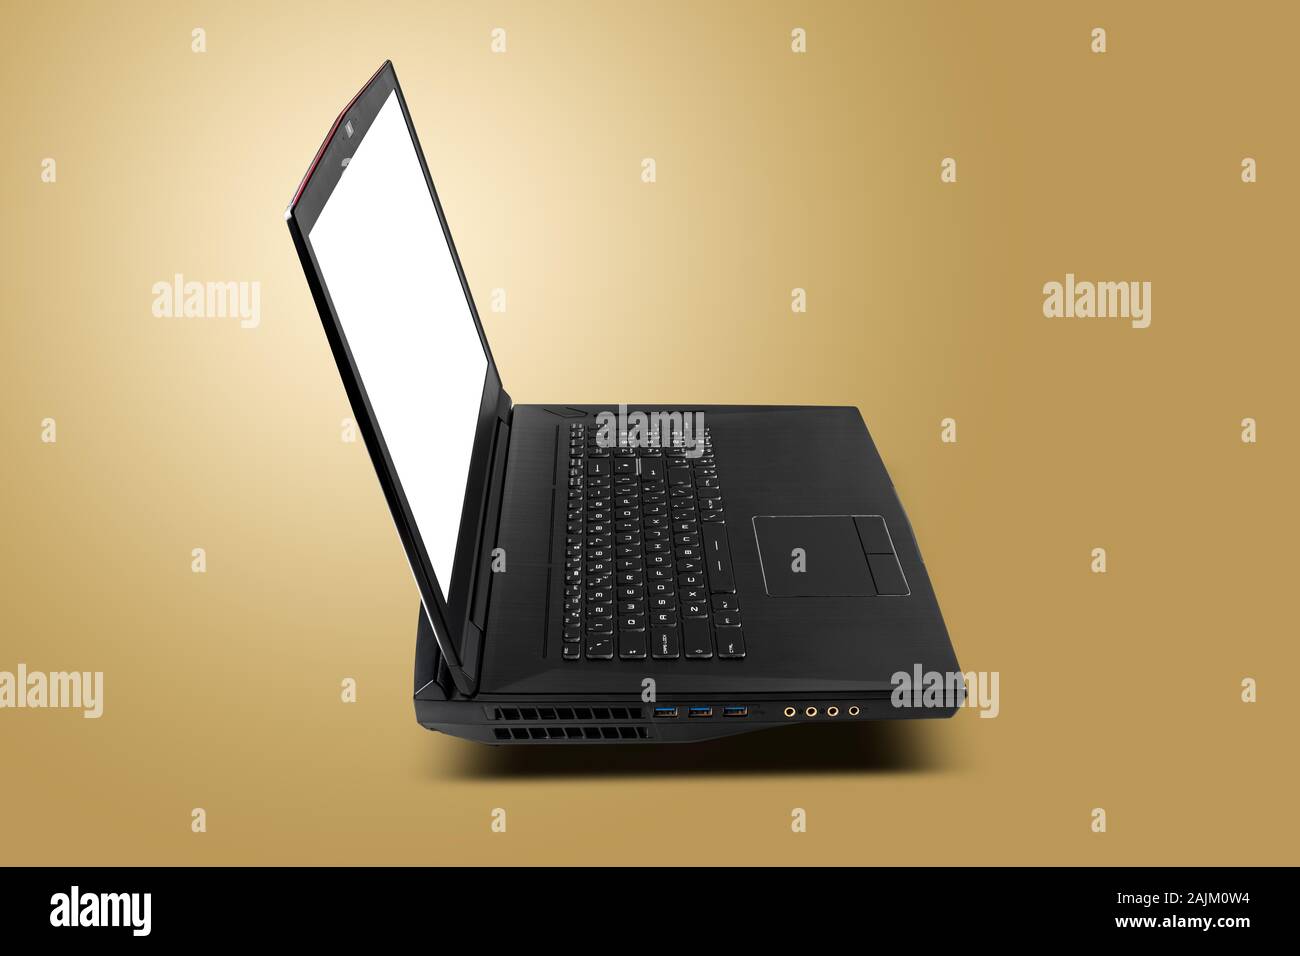 Side view of gaming laptop on golden yellow background. Laptop designed for gamers or professional players or 3d rendering Stock Photo